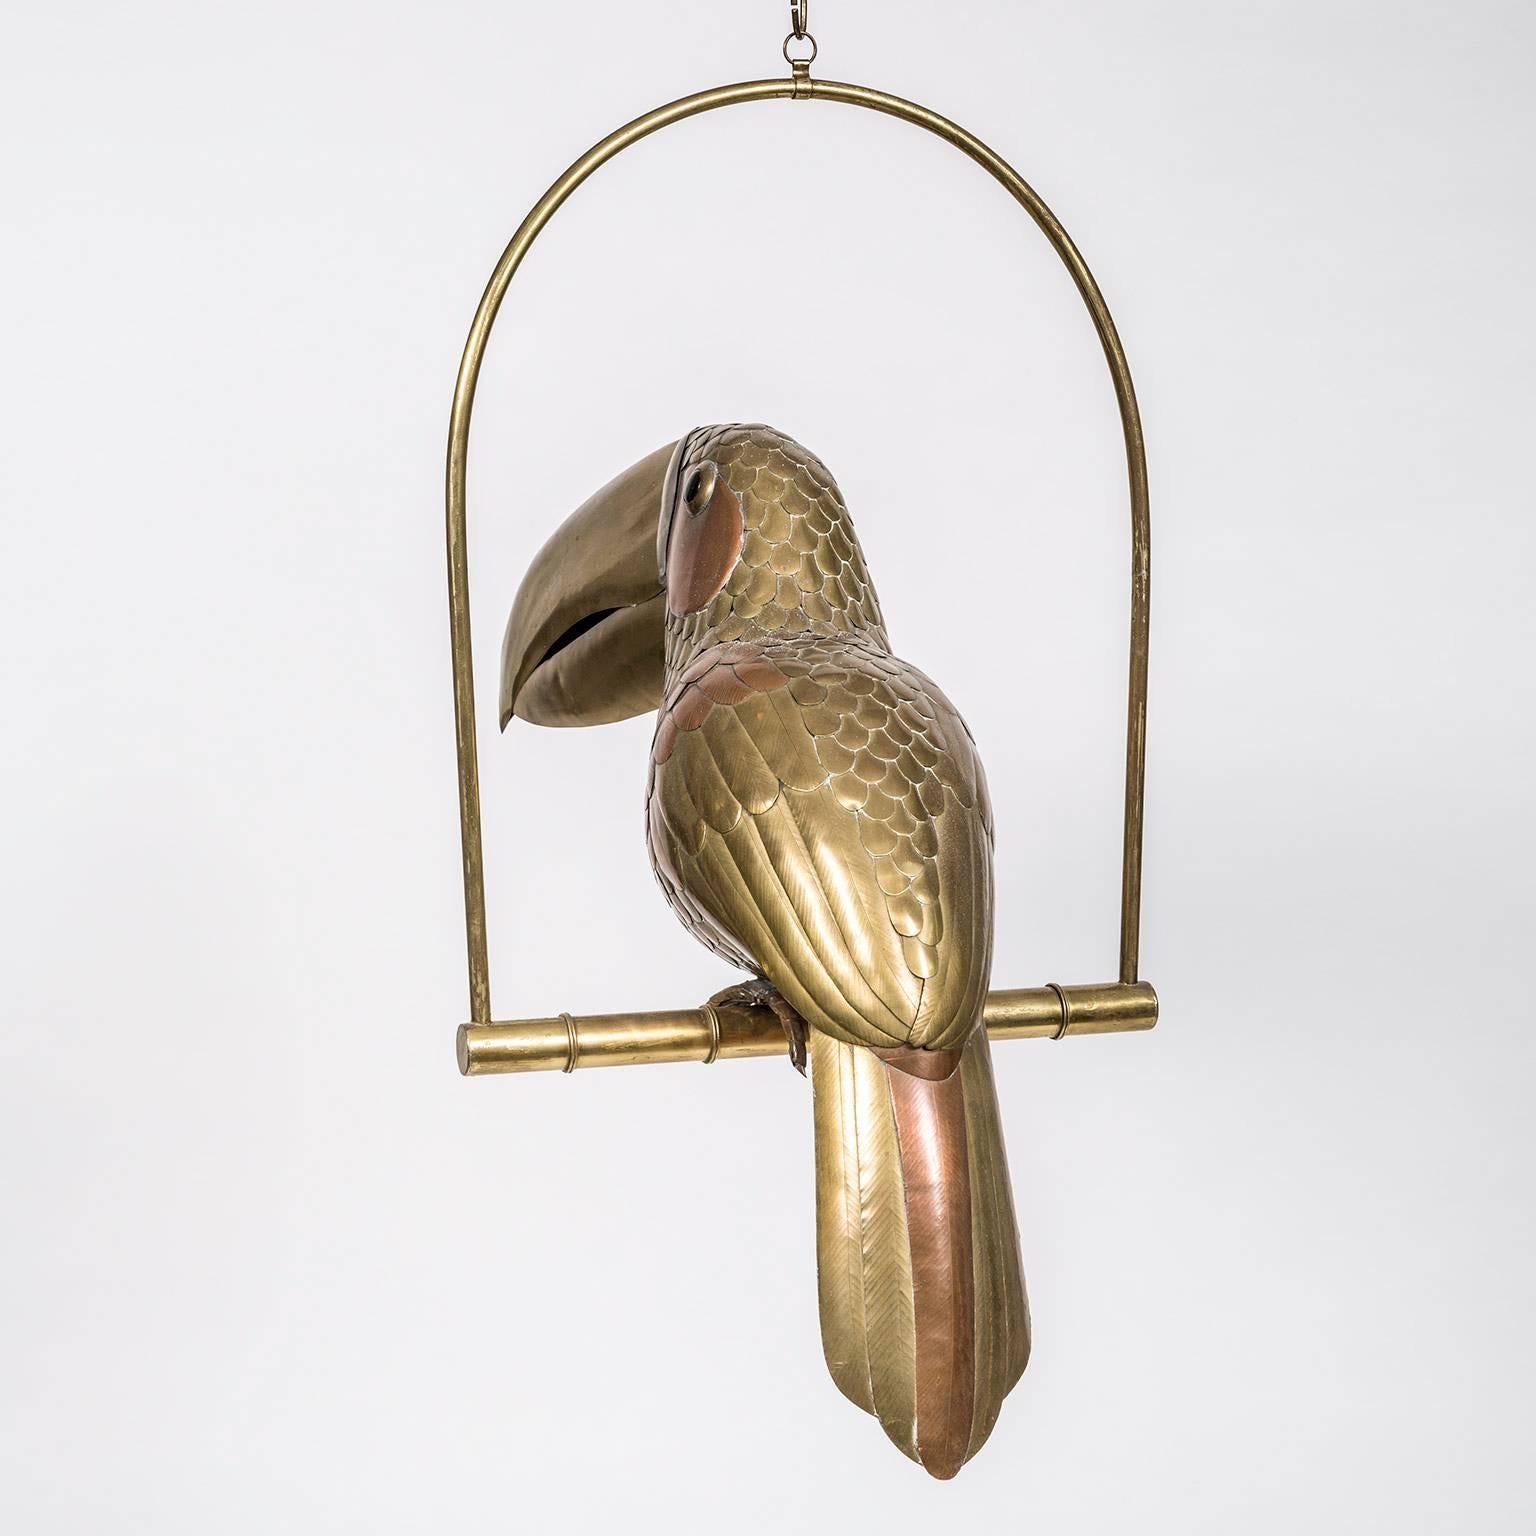 Sergio Bustamante brass and copper perched parrot with glass eyes and 11 inch brass chain to suspend from the ceiling. Executed in the 1980s by the renowned Mexican artist in his hometown of Guadalajara.